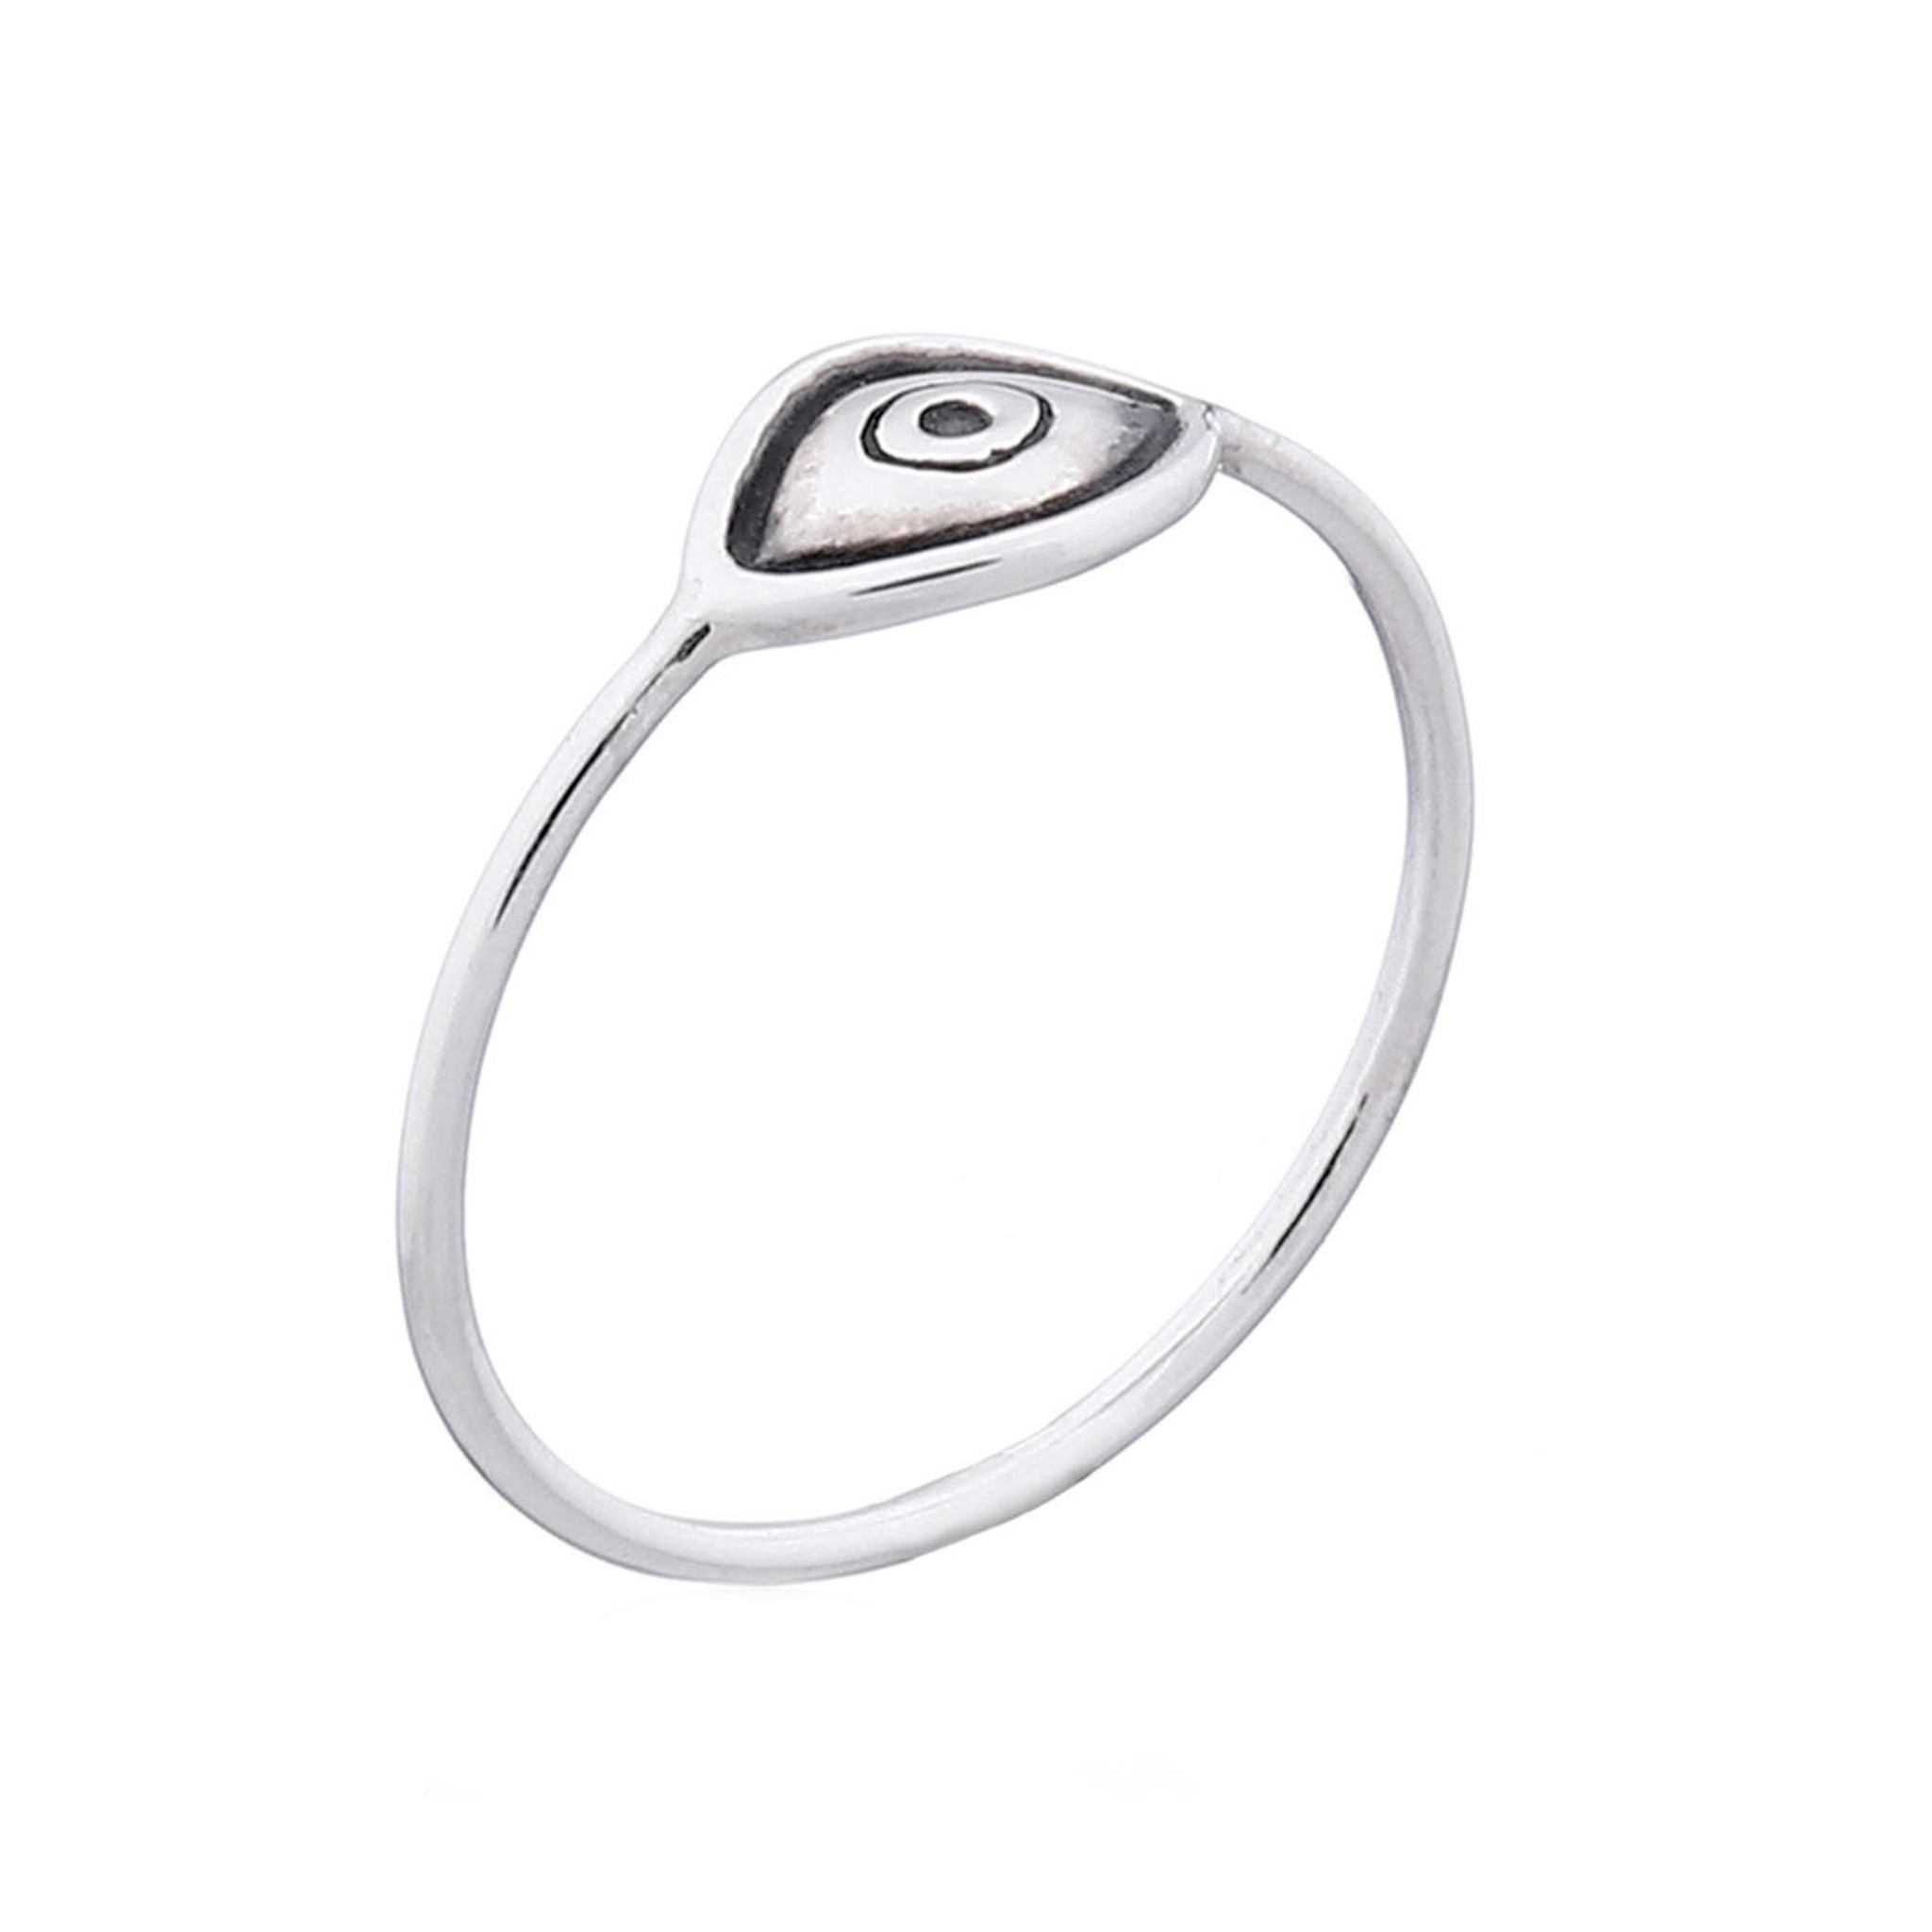 Evil Eye Ring 925 Sterling Silver 8mm Casual Band Size 4-10 | eBay